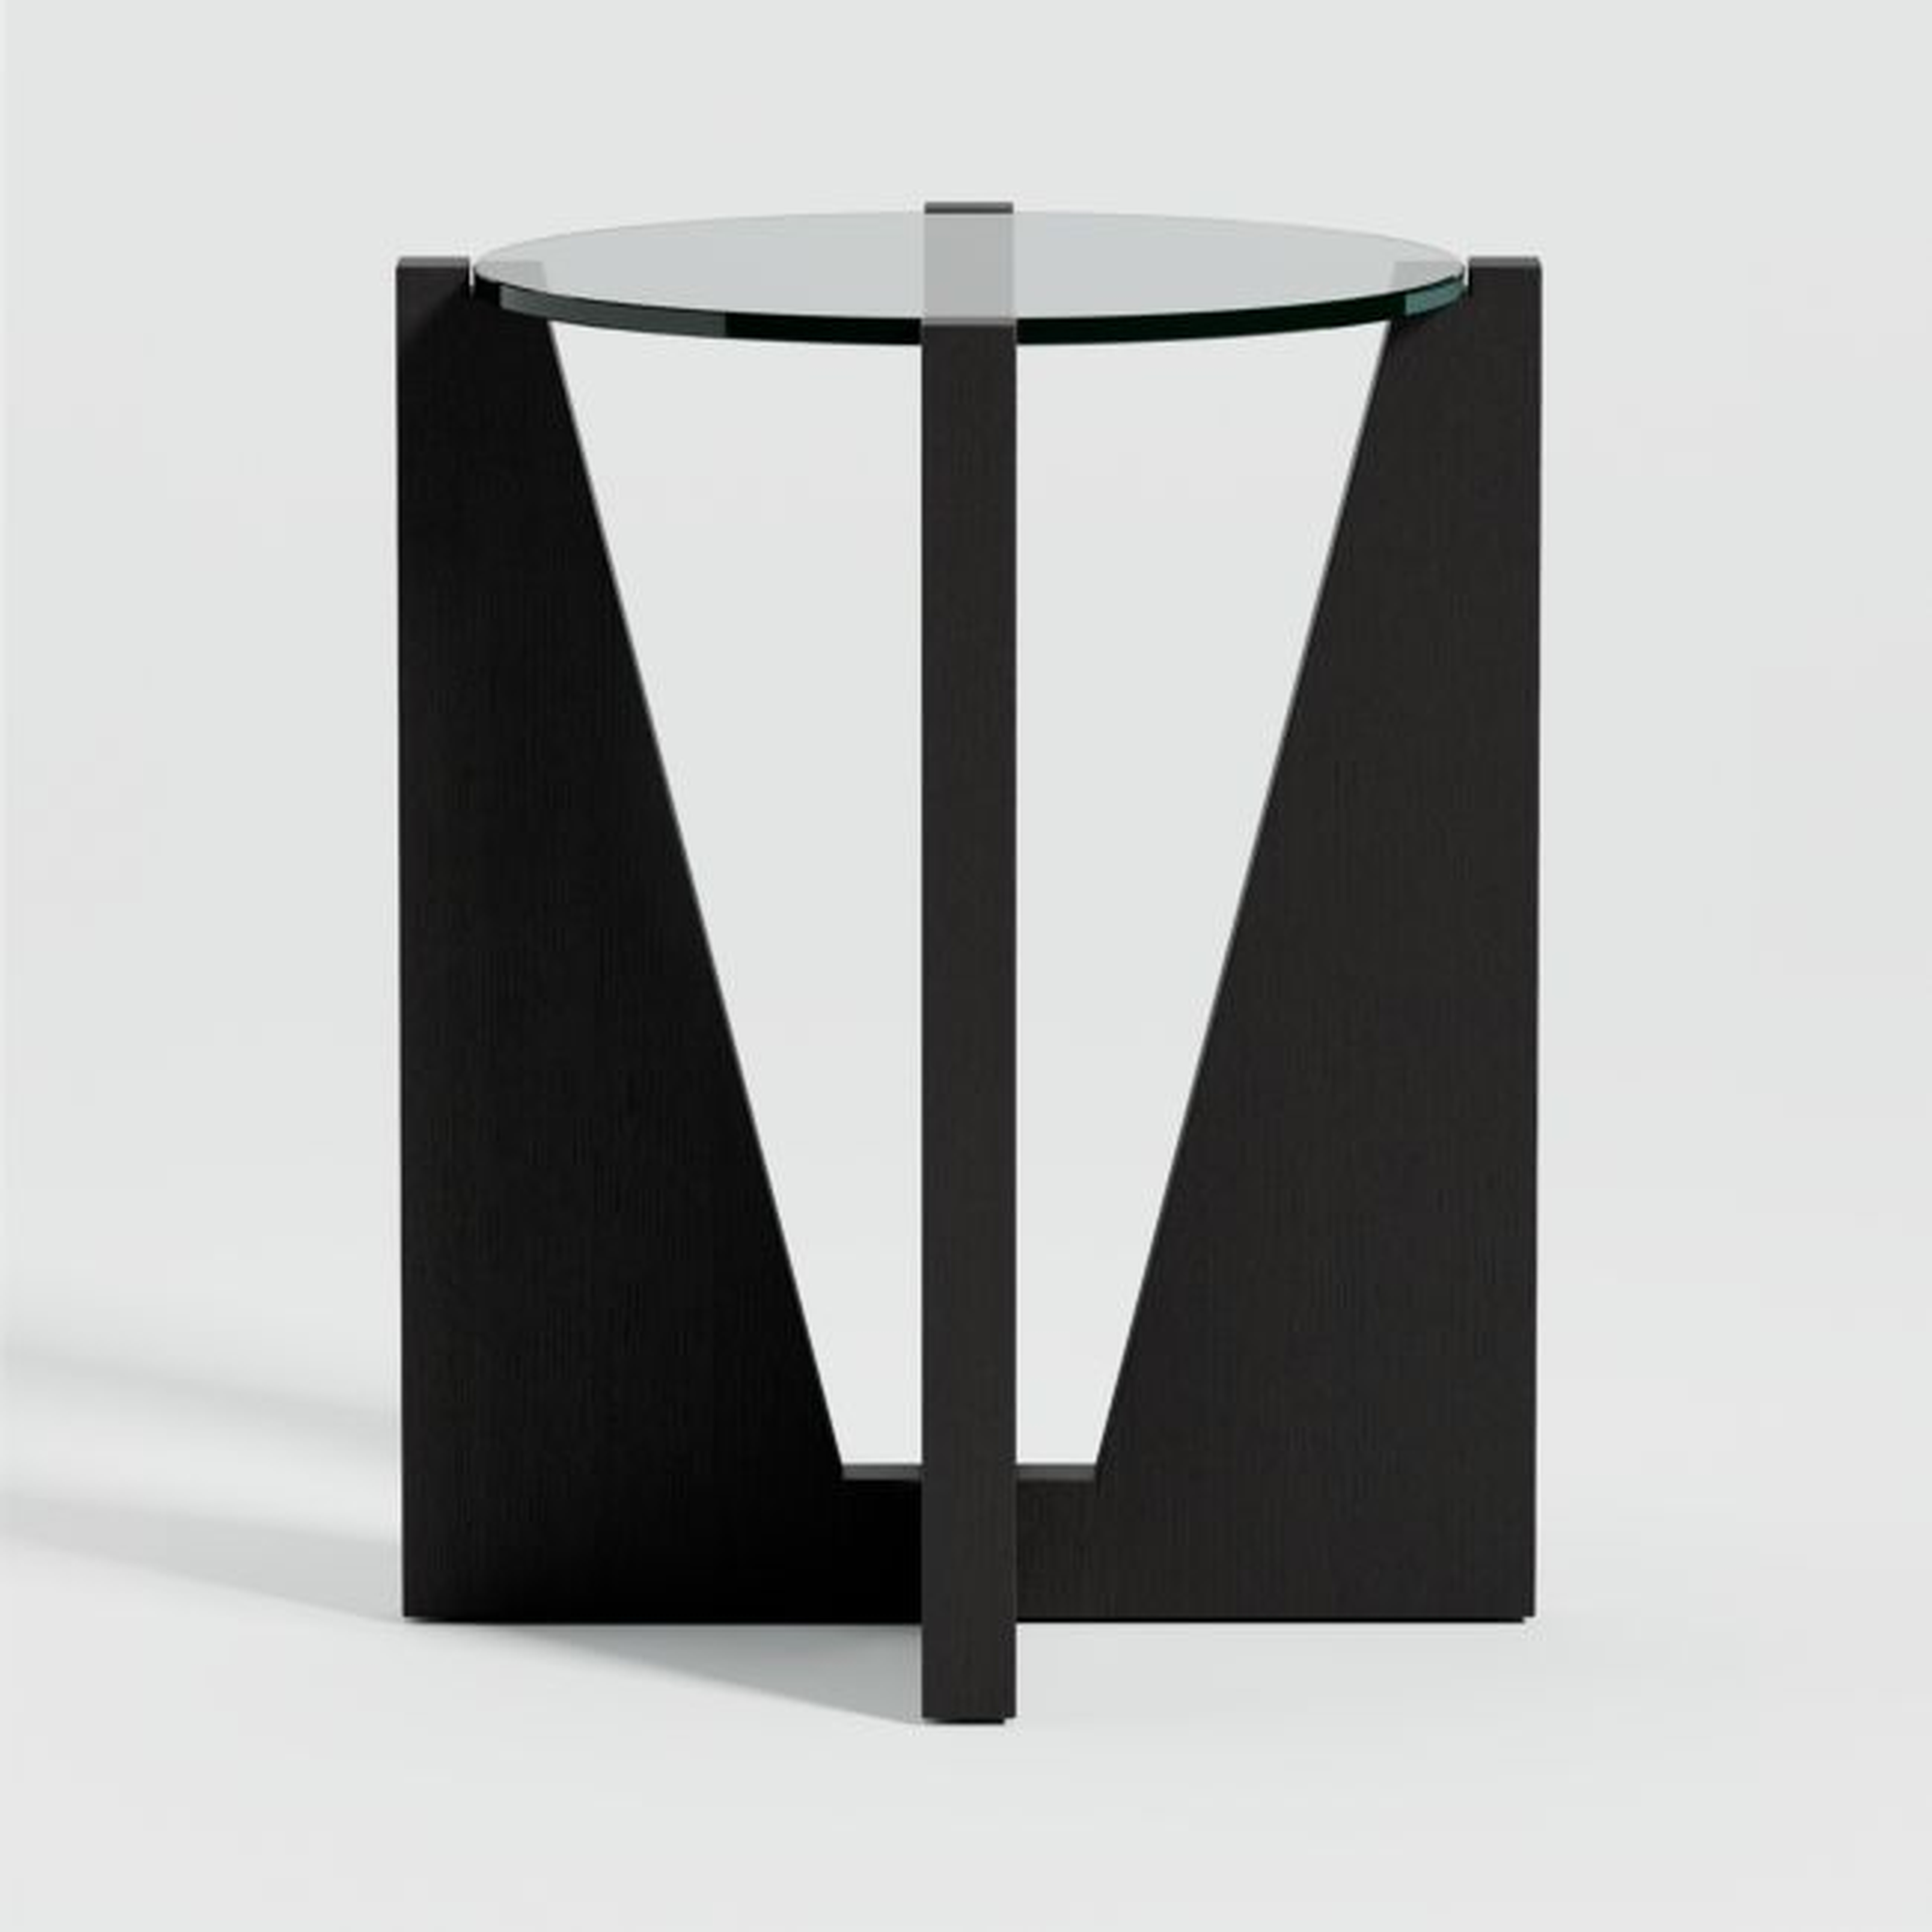 Miro Glass End Table with Black Ebonized White Oak Wood Base - Crate and Barrel